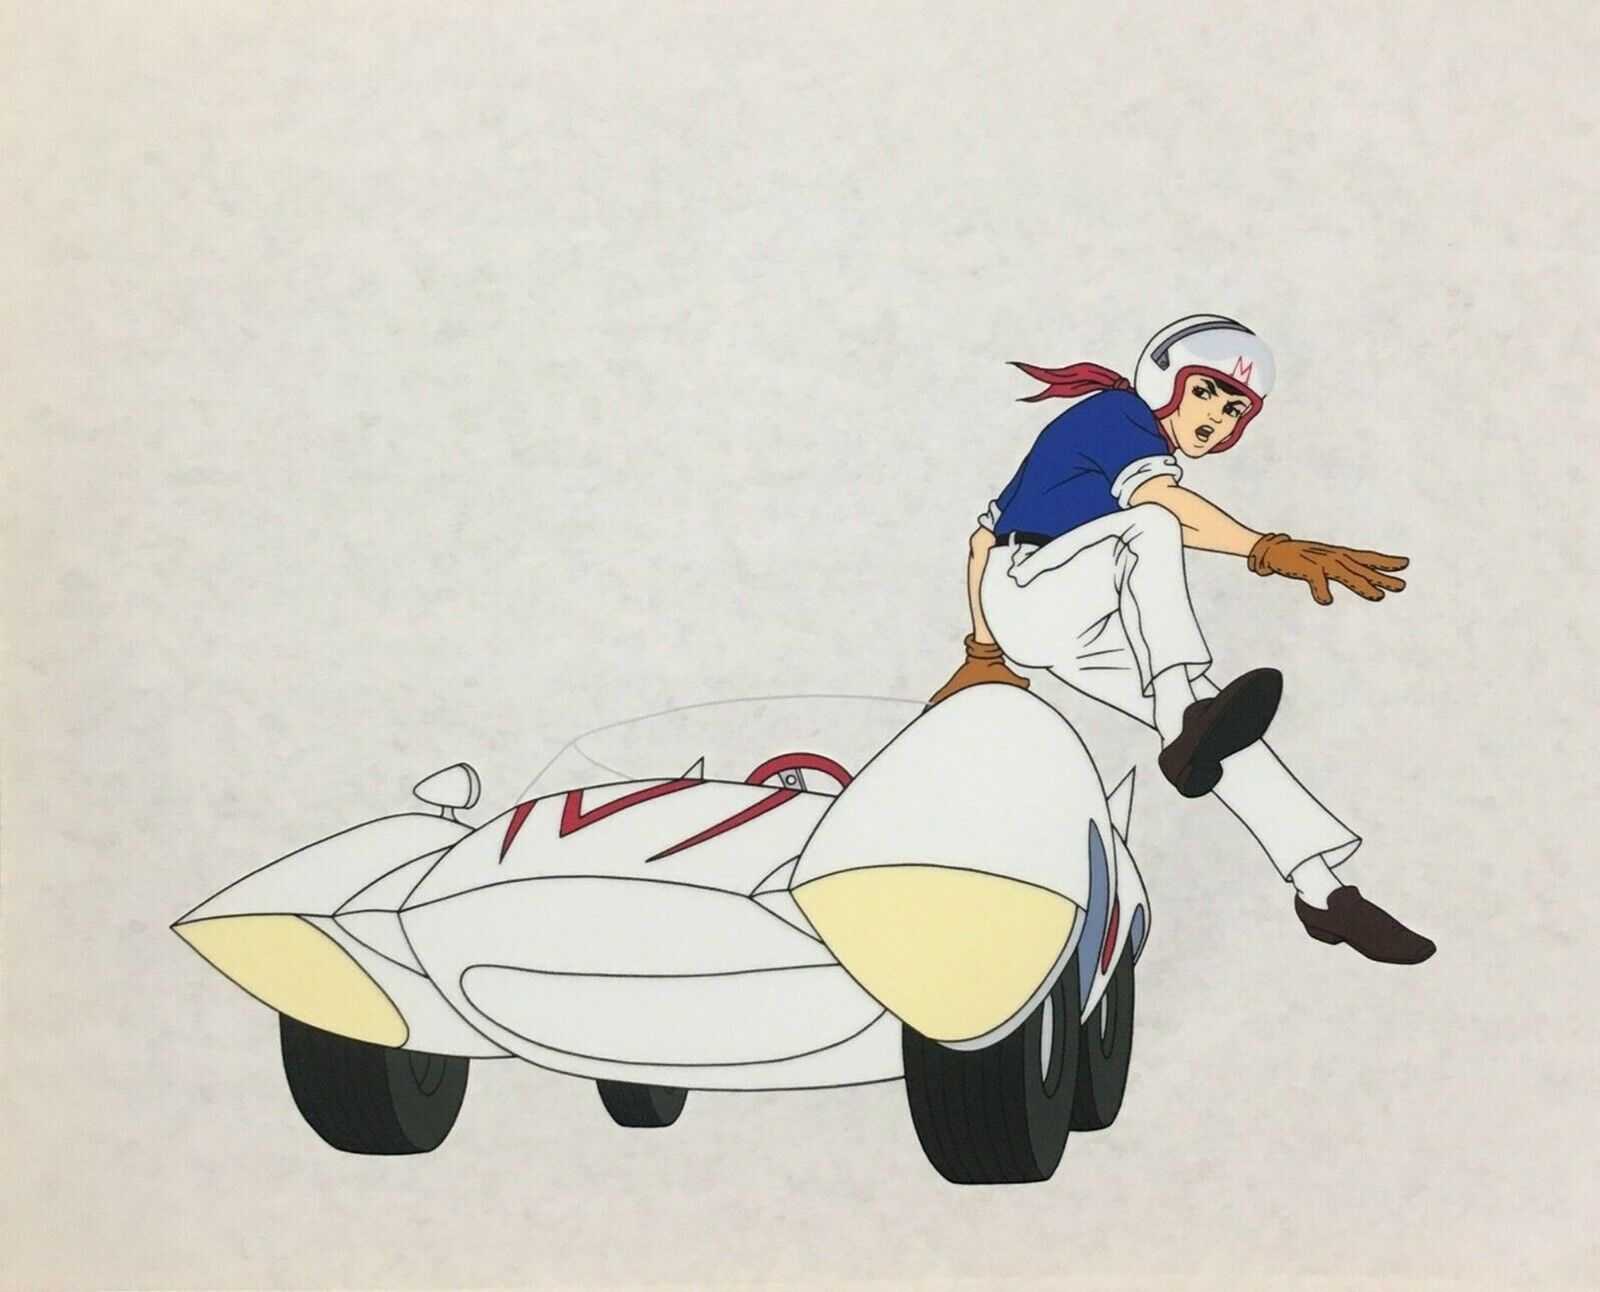 Speed Racer 1 Original Framed Animation Art Collectible Sericel Edition of 2500